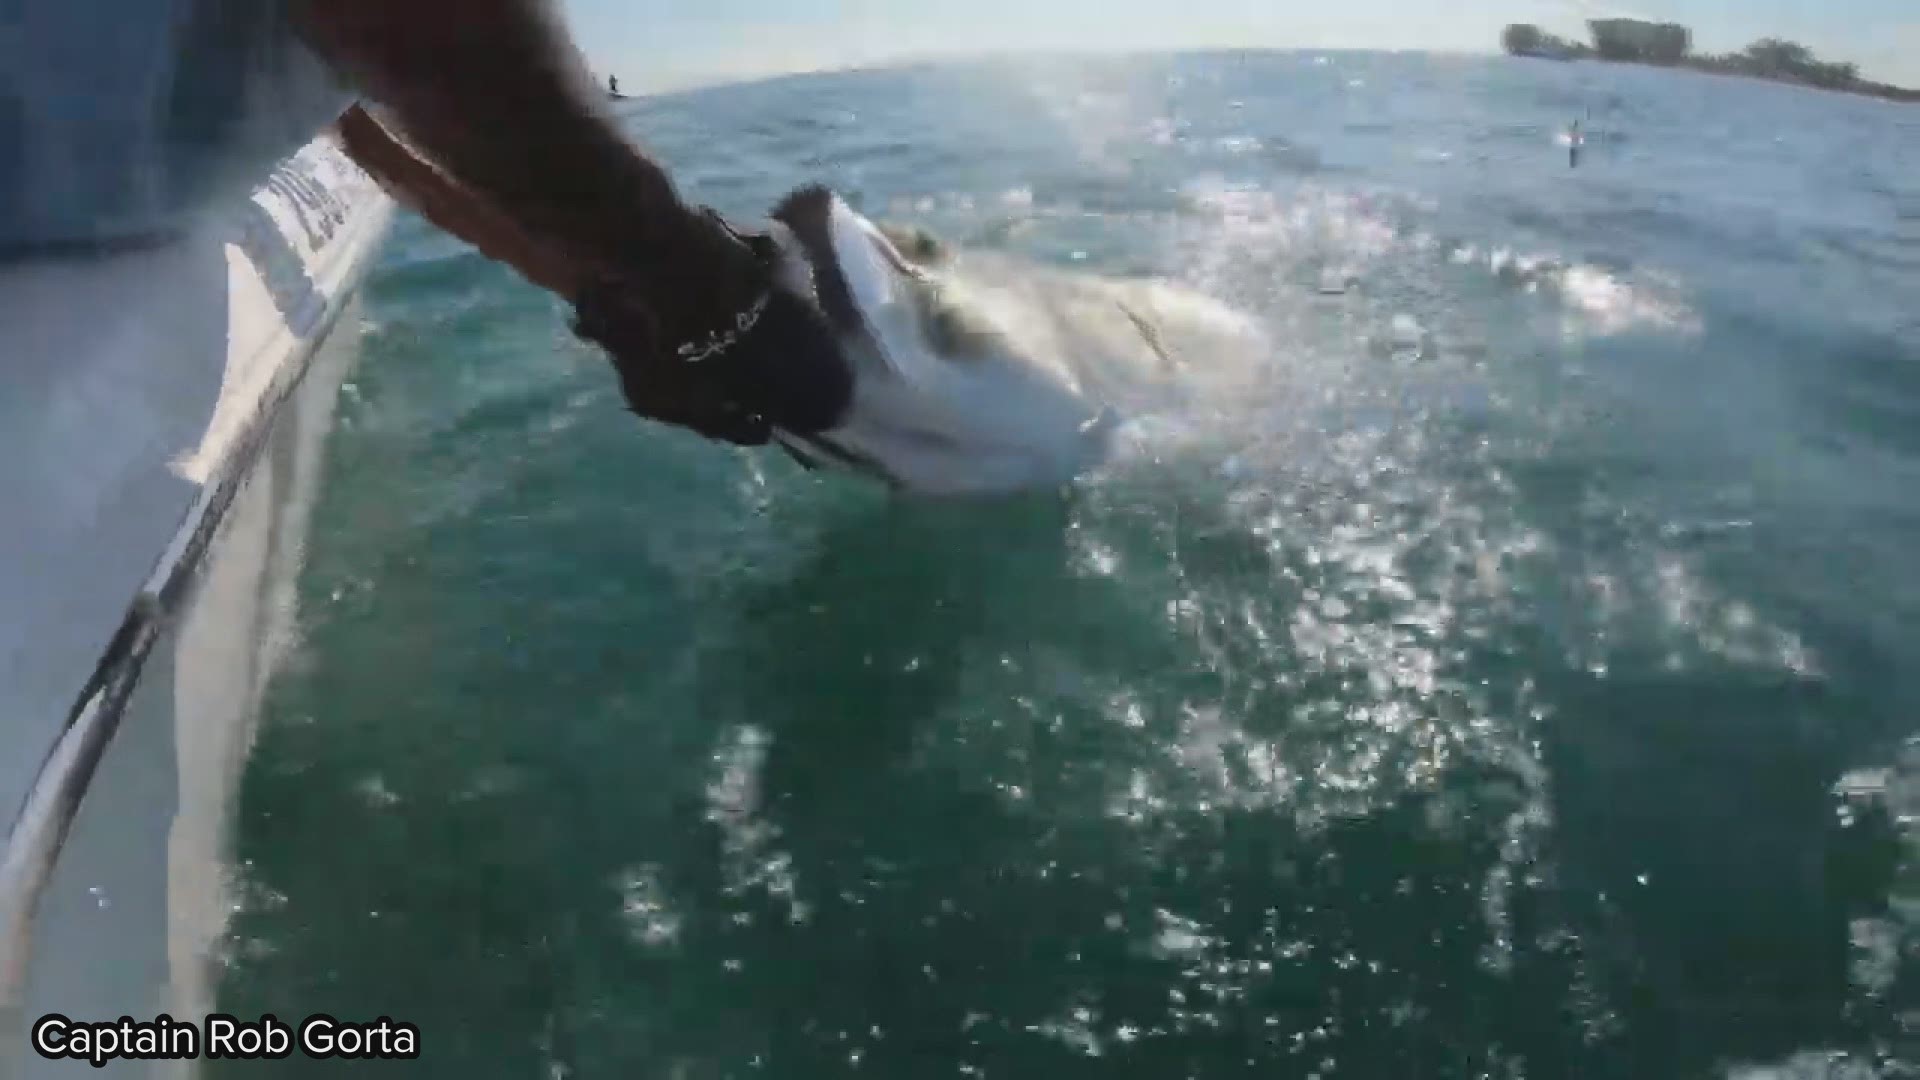 During a recent fishing trip, Rob Gorta said a hammerhead shark swam up and snatched a tarpon right out of his hands.

The whole attack and struggle was caught on video.

According to Gorta's website, he's been a Tampa Bay area fishing guide for more than 22 years. He says he spends about two months every year tarpon fishing in the area.

He said he's caught some crazy shark attacks over the years, but this recent one was pretty intense.